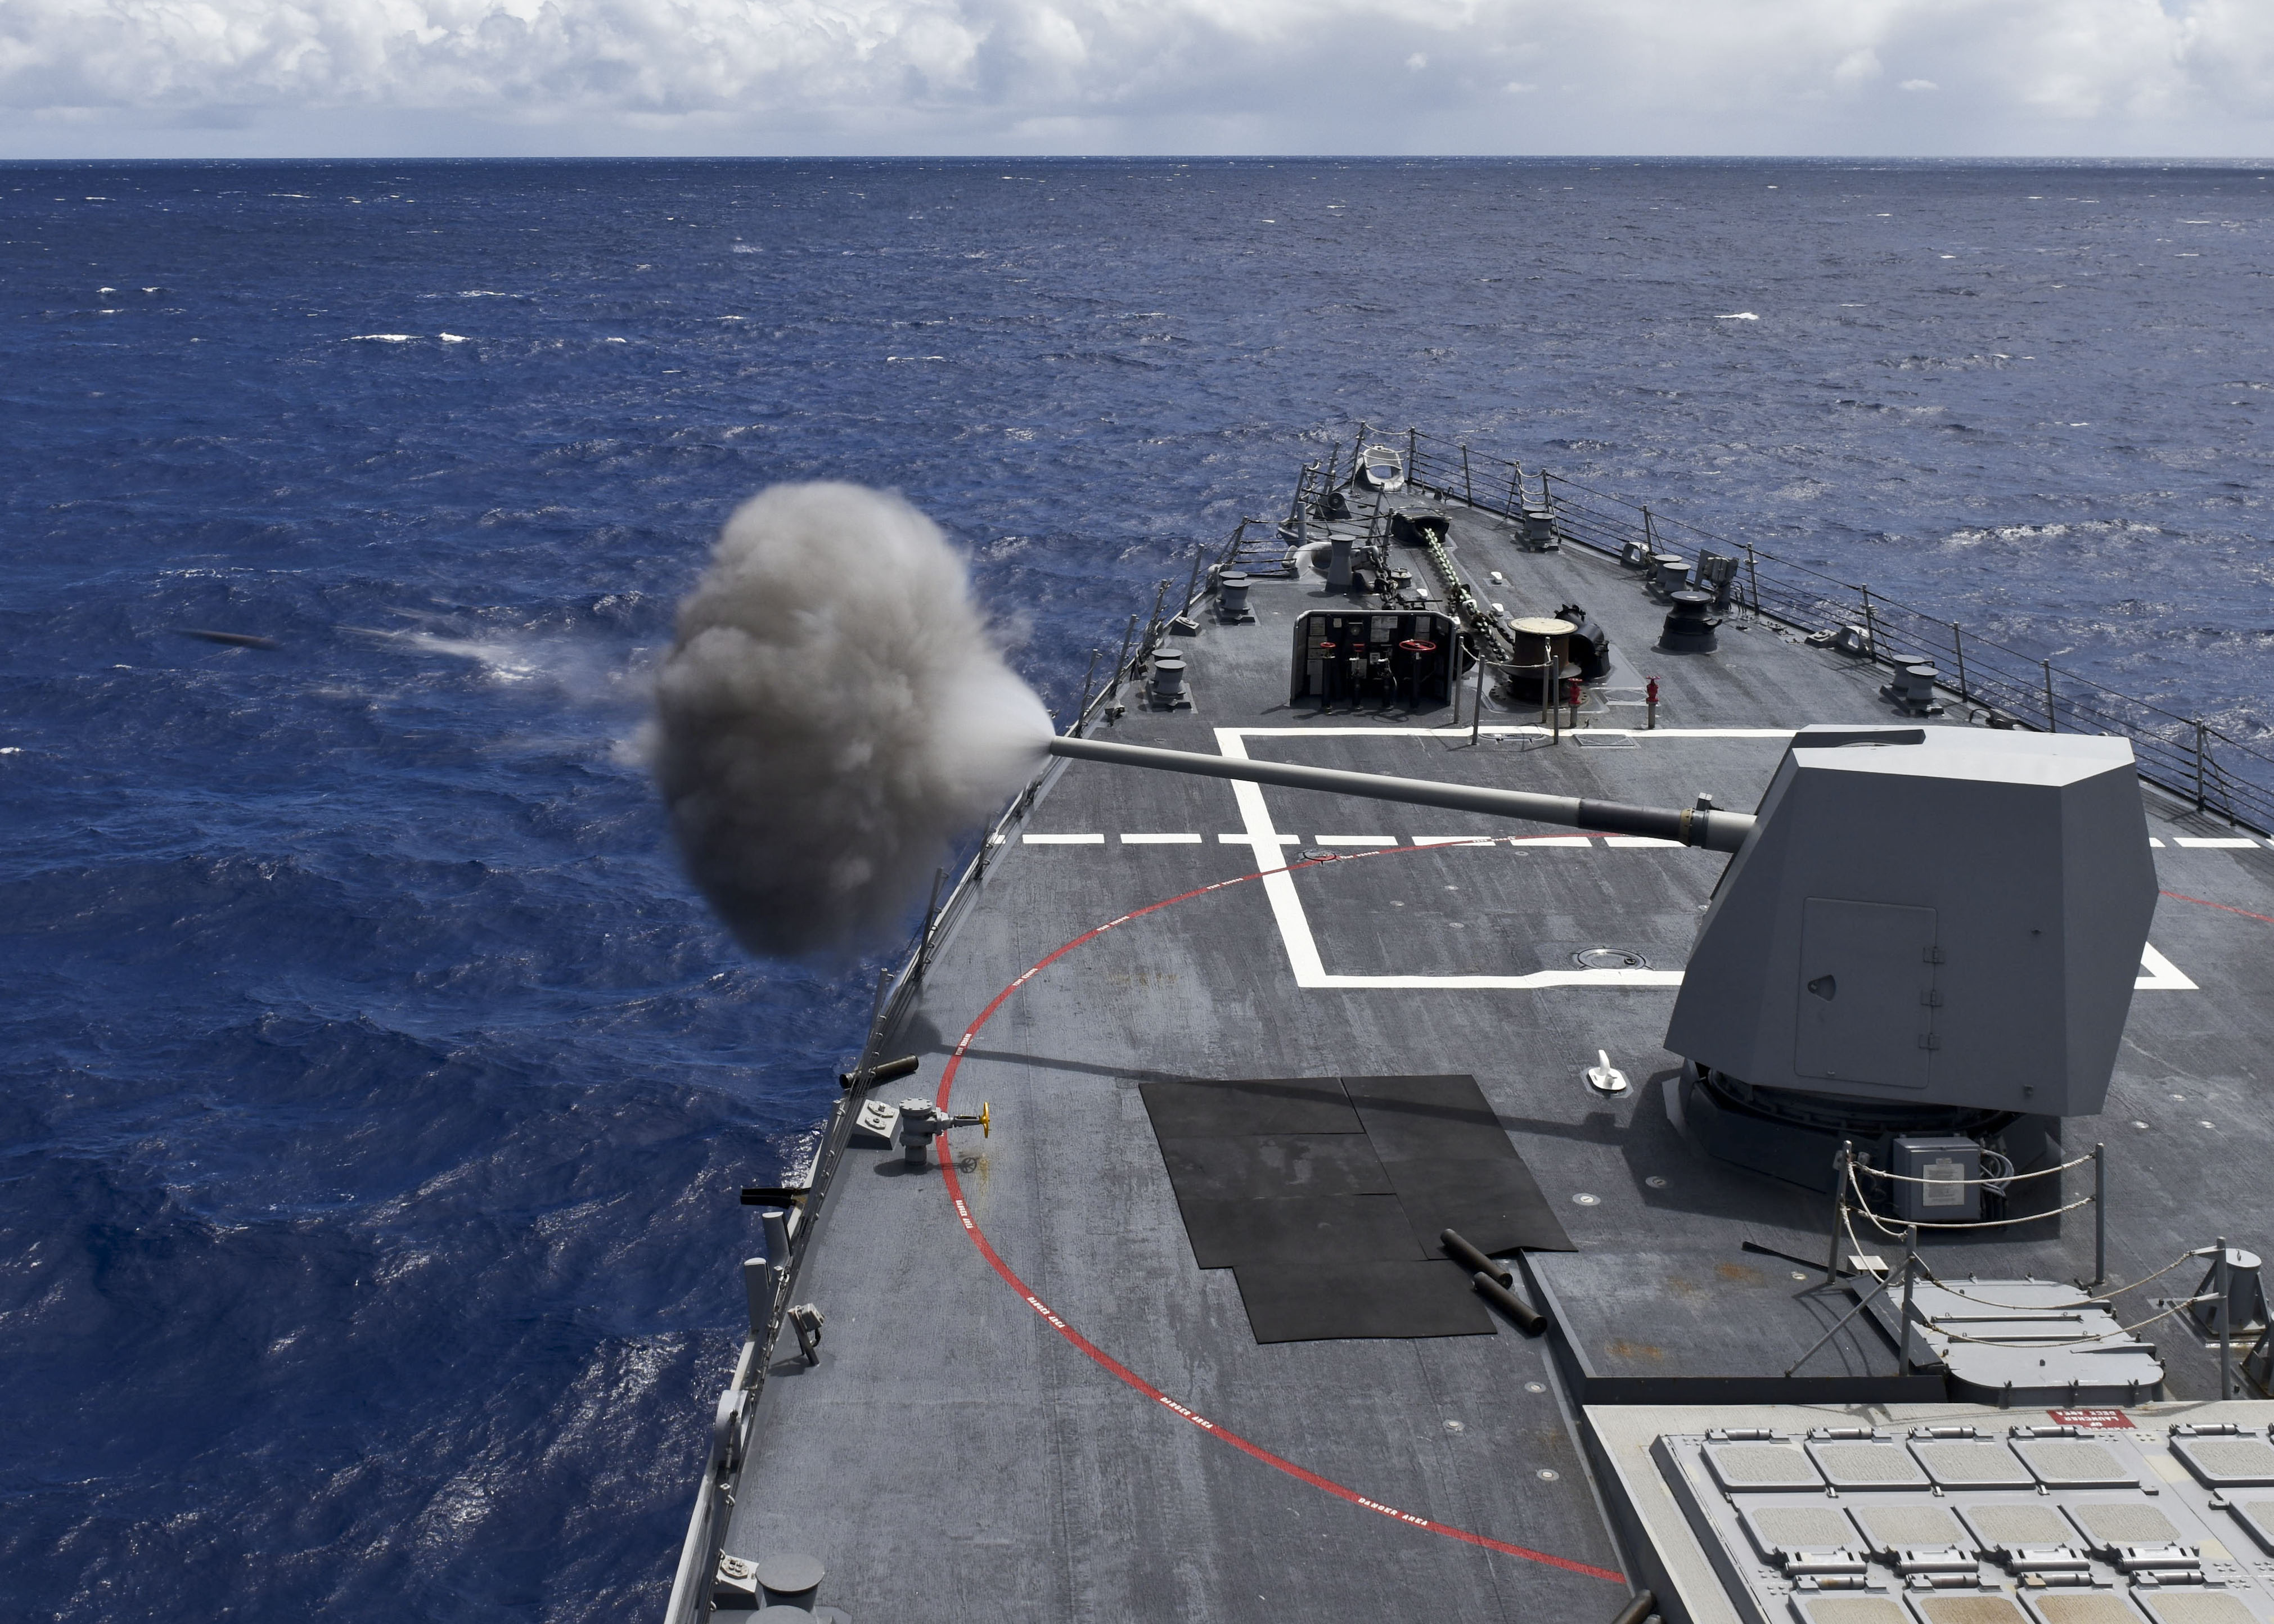 USS Shoup (DDG 86) fires a MK 45 5-inch gun during a live fire exercise during Rim of the Pacific 2016. US Navy Photo